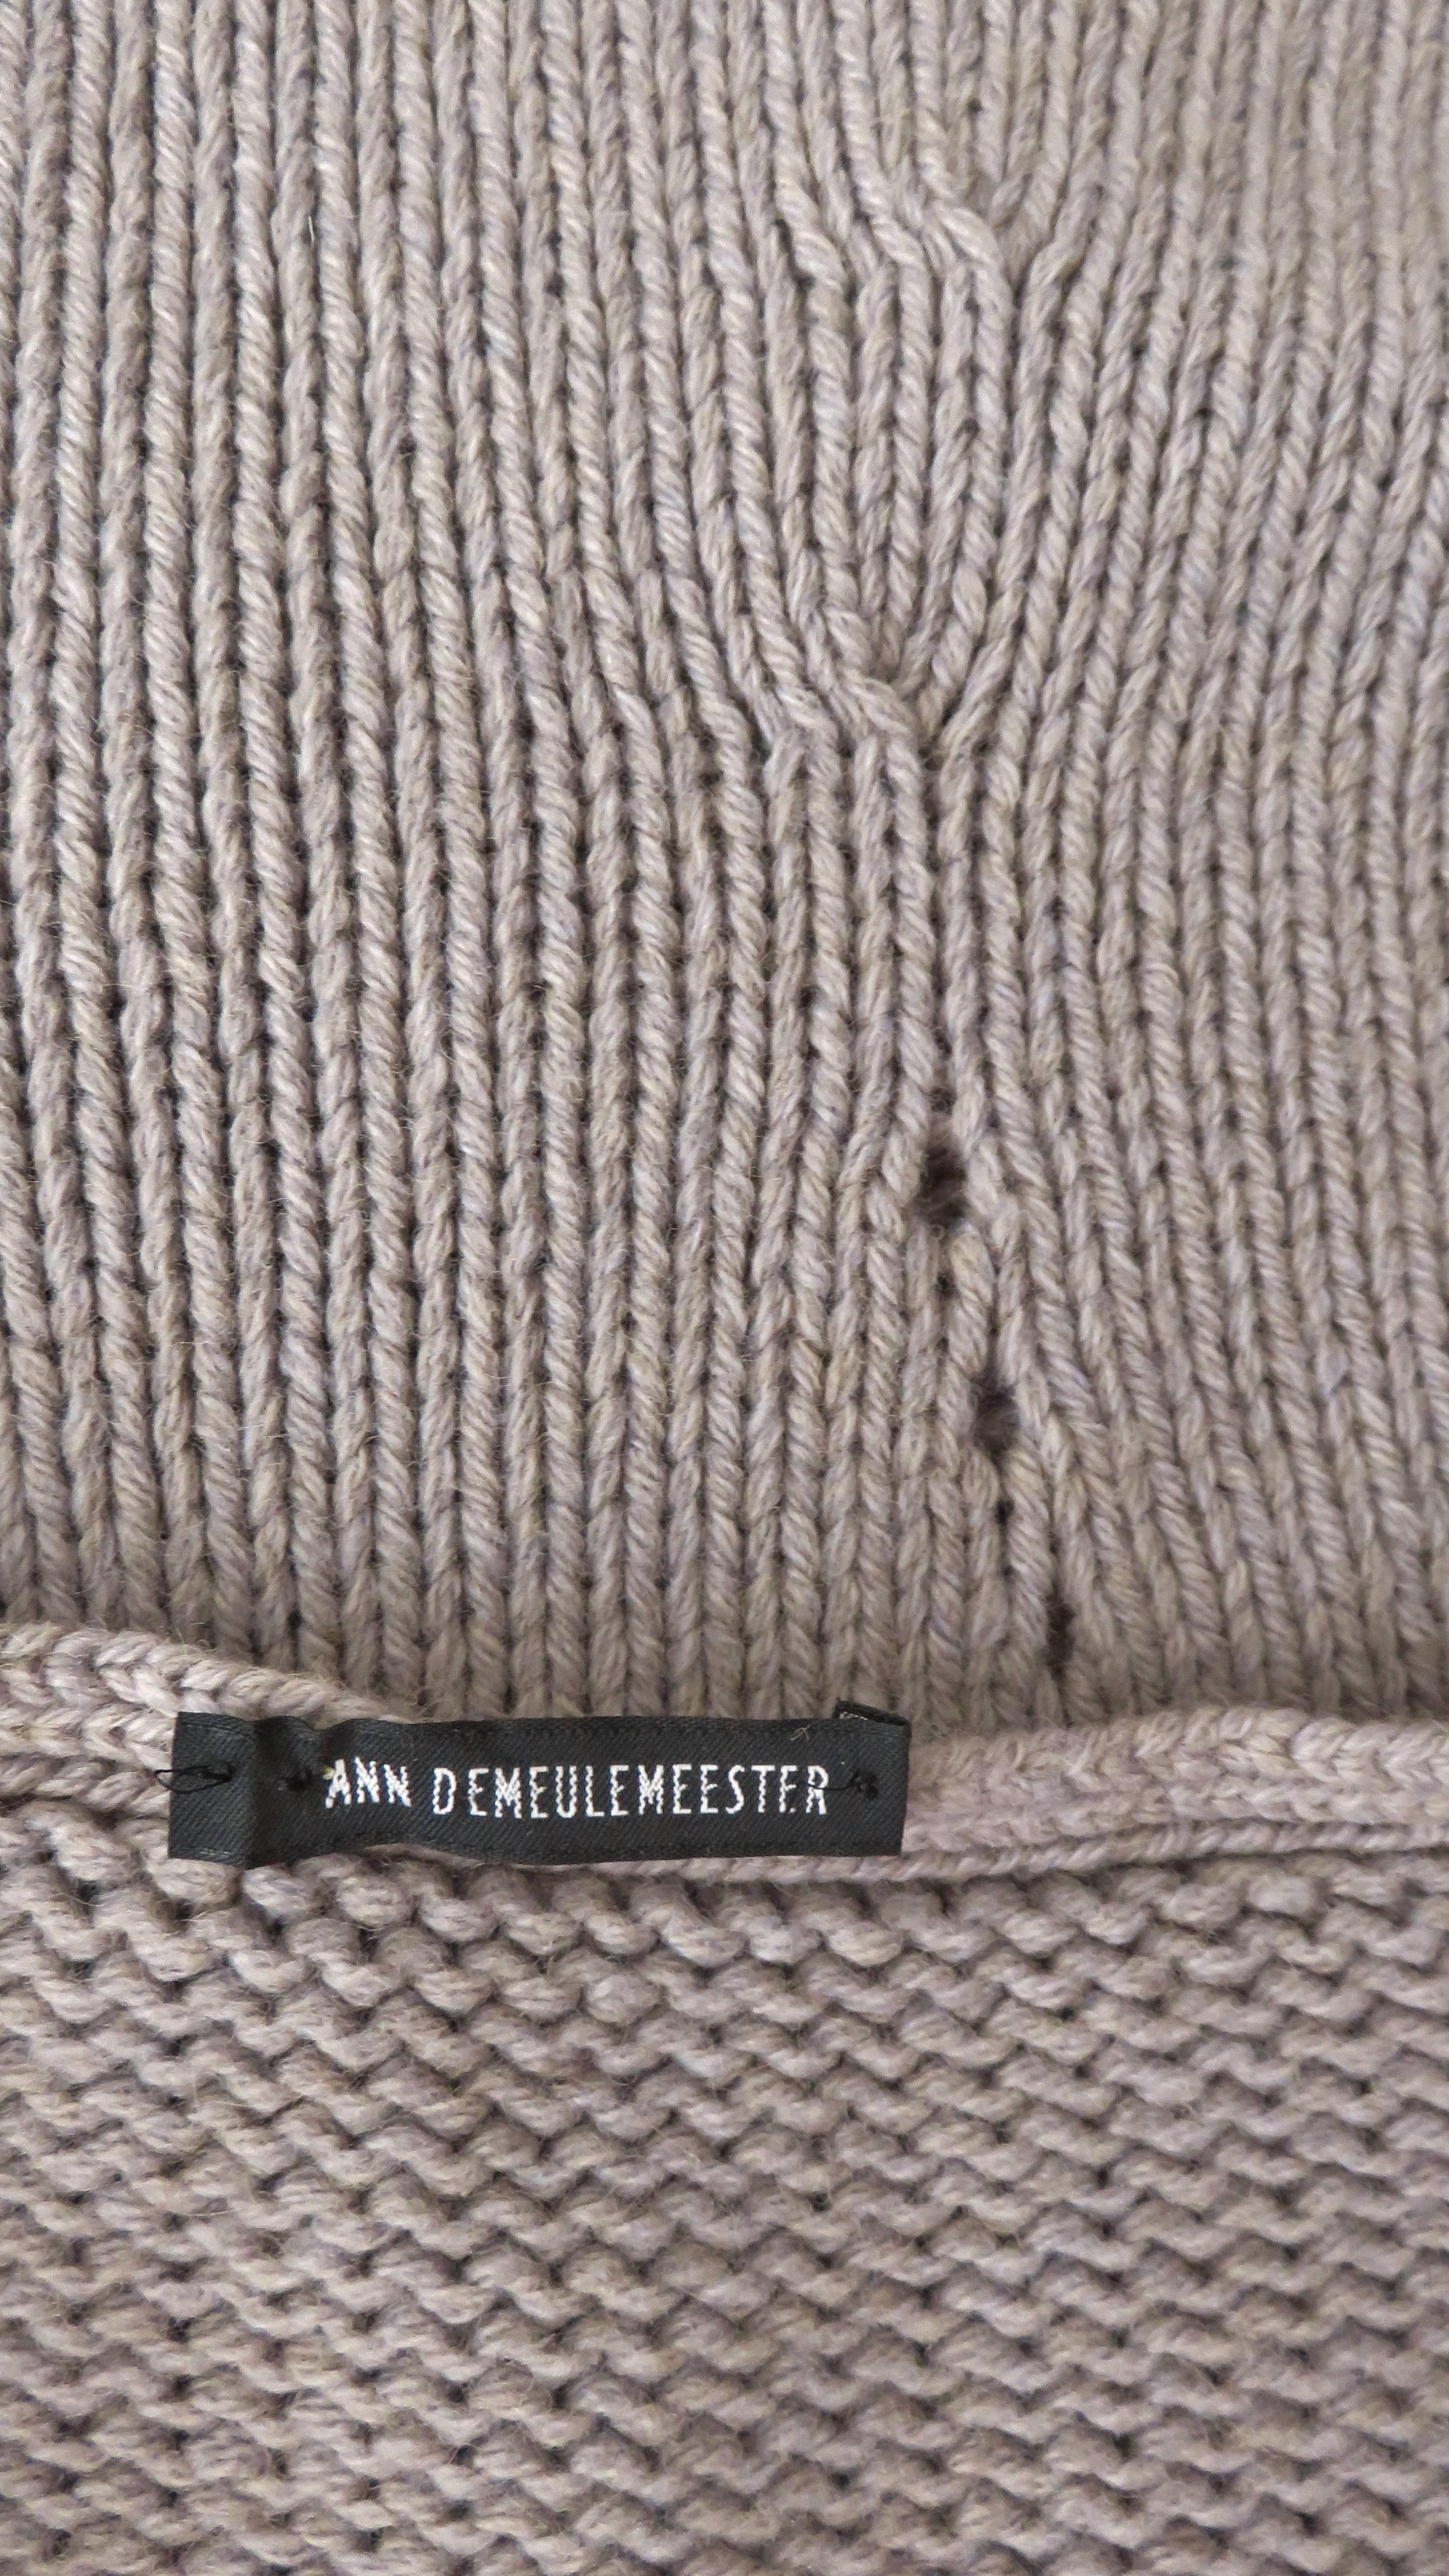 Ann Demeulemeester New Oversize Sweater and Neck Tube  For Sale 5